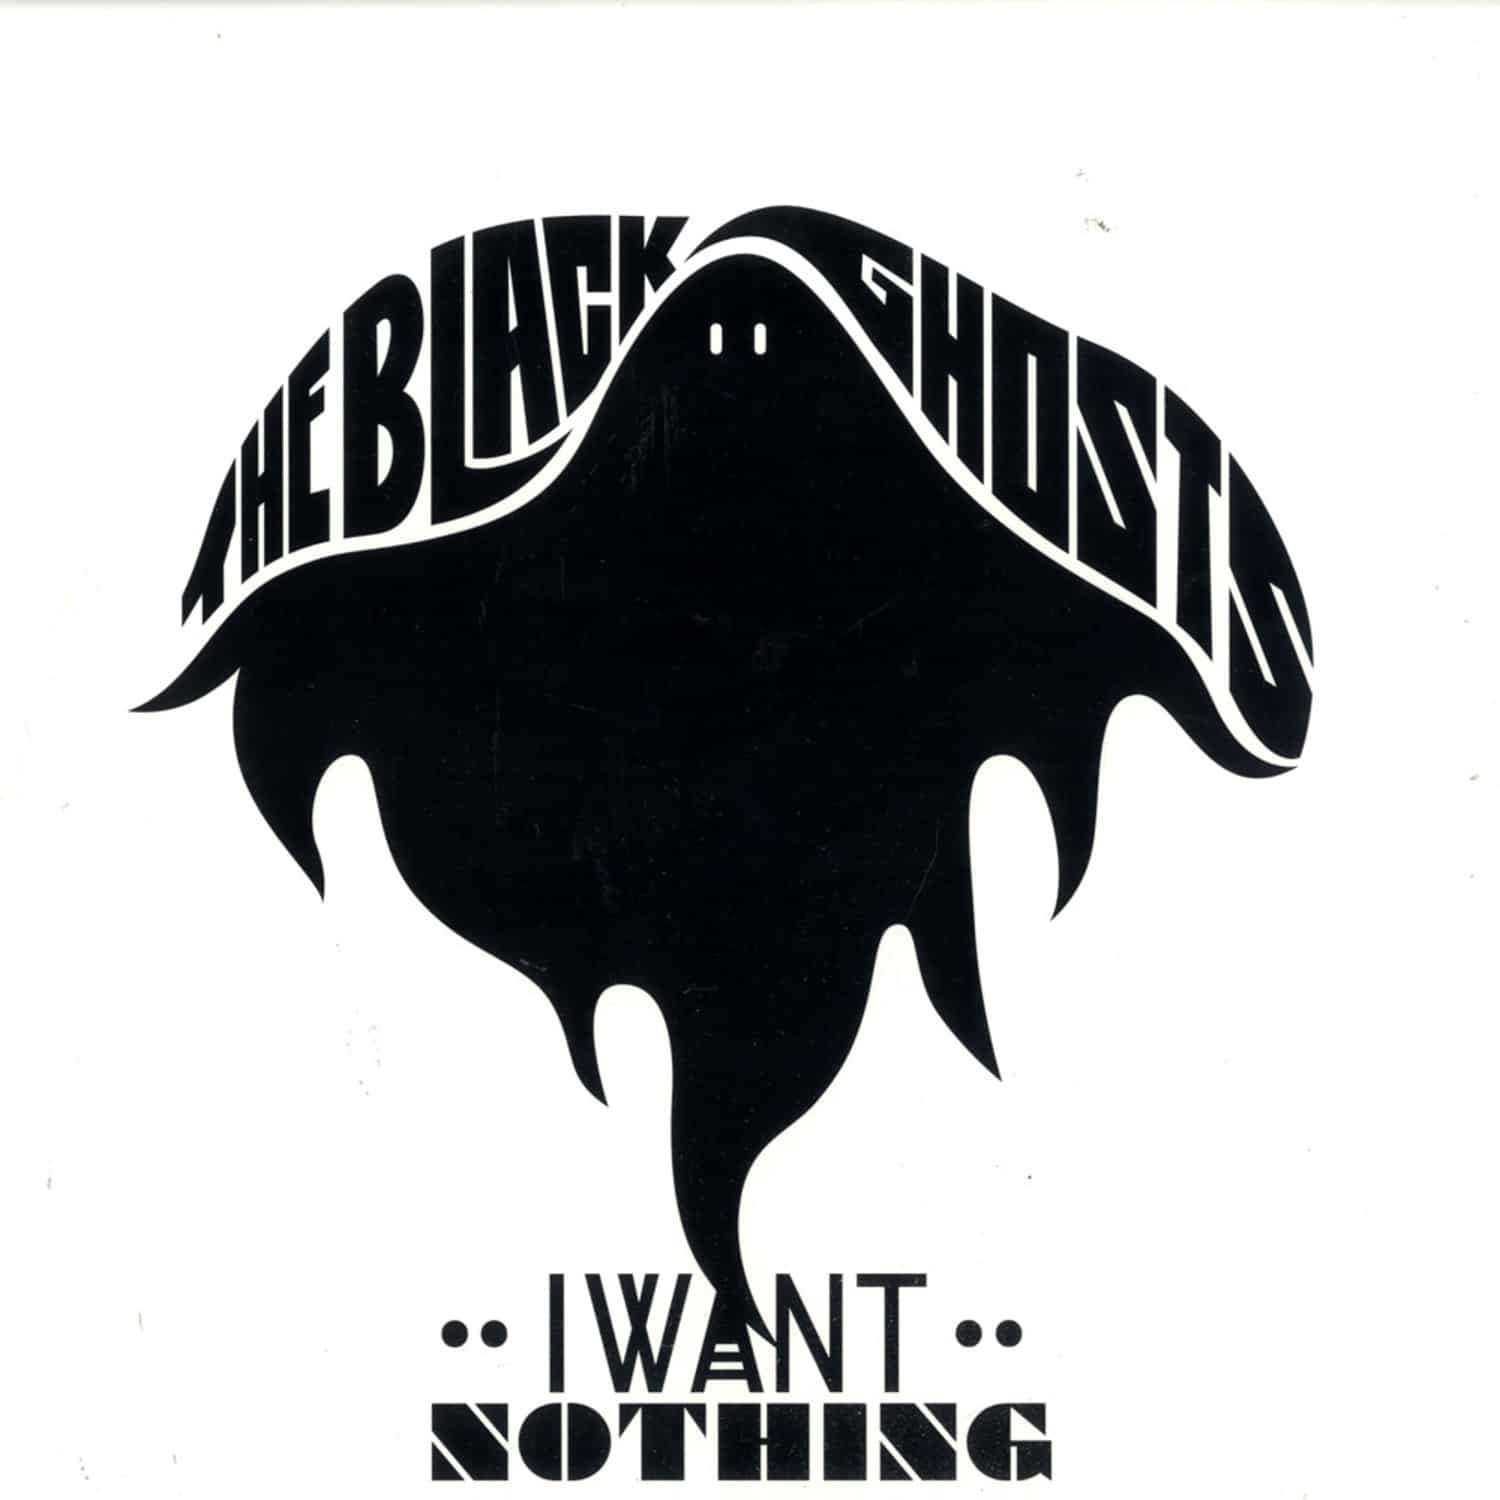 Black Ghosts - I WANT NOTHING